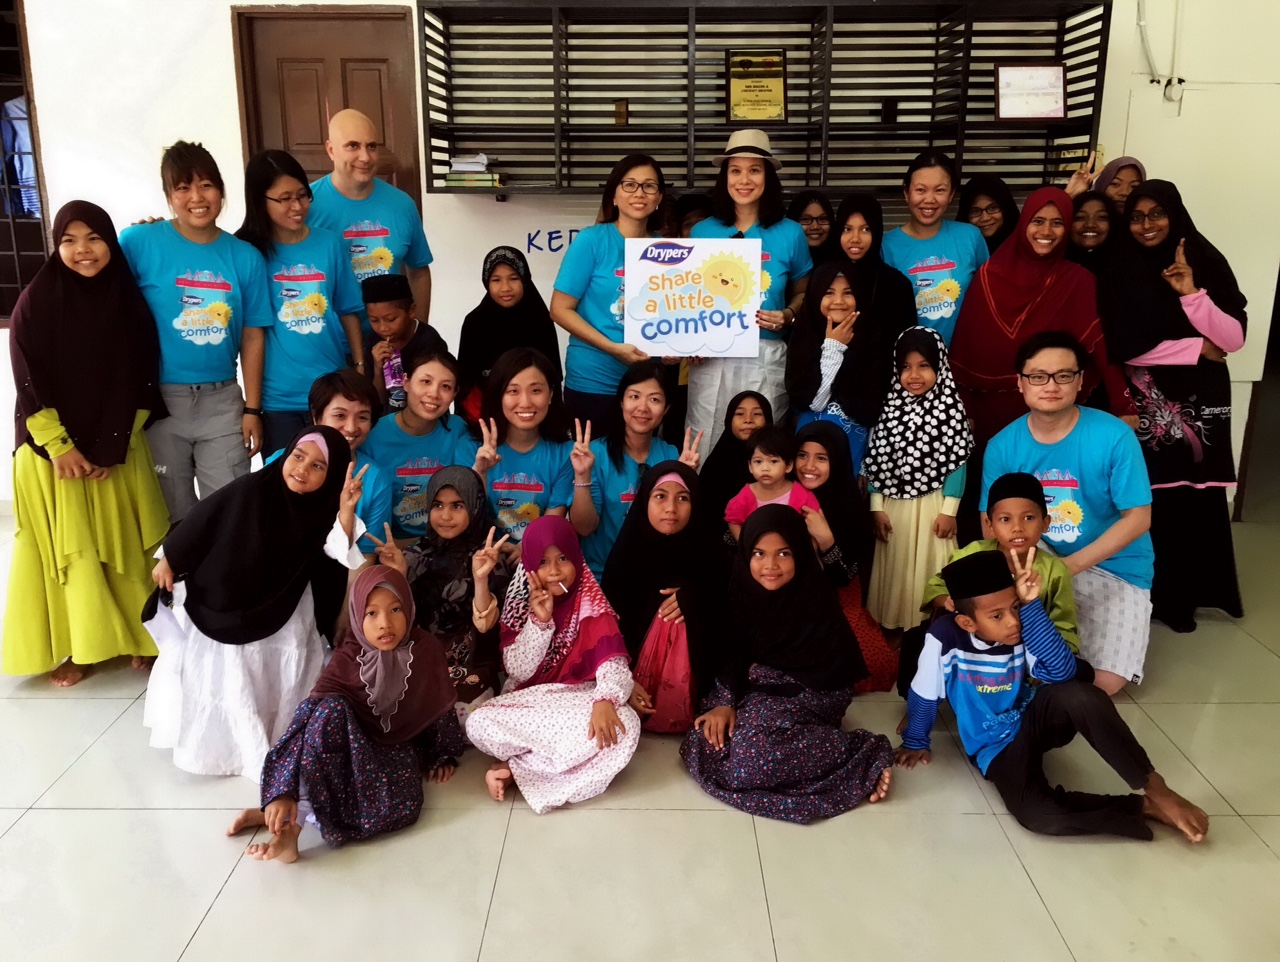 Evelyn Chan, Marketing Director of SCA Hygiene Marketing Malaysia Sdn Bhd (center left), Elaine Daly, Drypers’ Moms of Malaysia (MOM) advocate (center right), volunteers with children at the orphanage